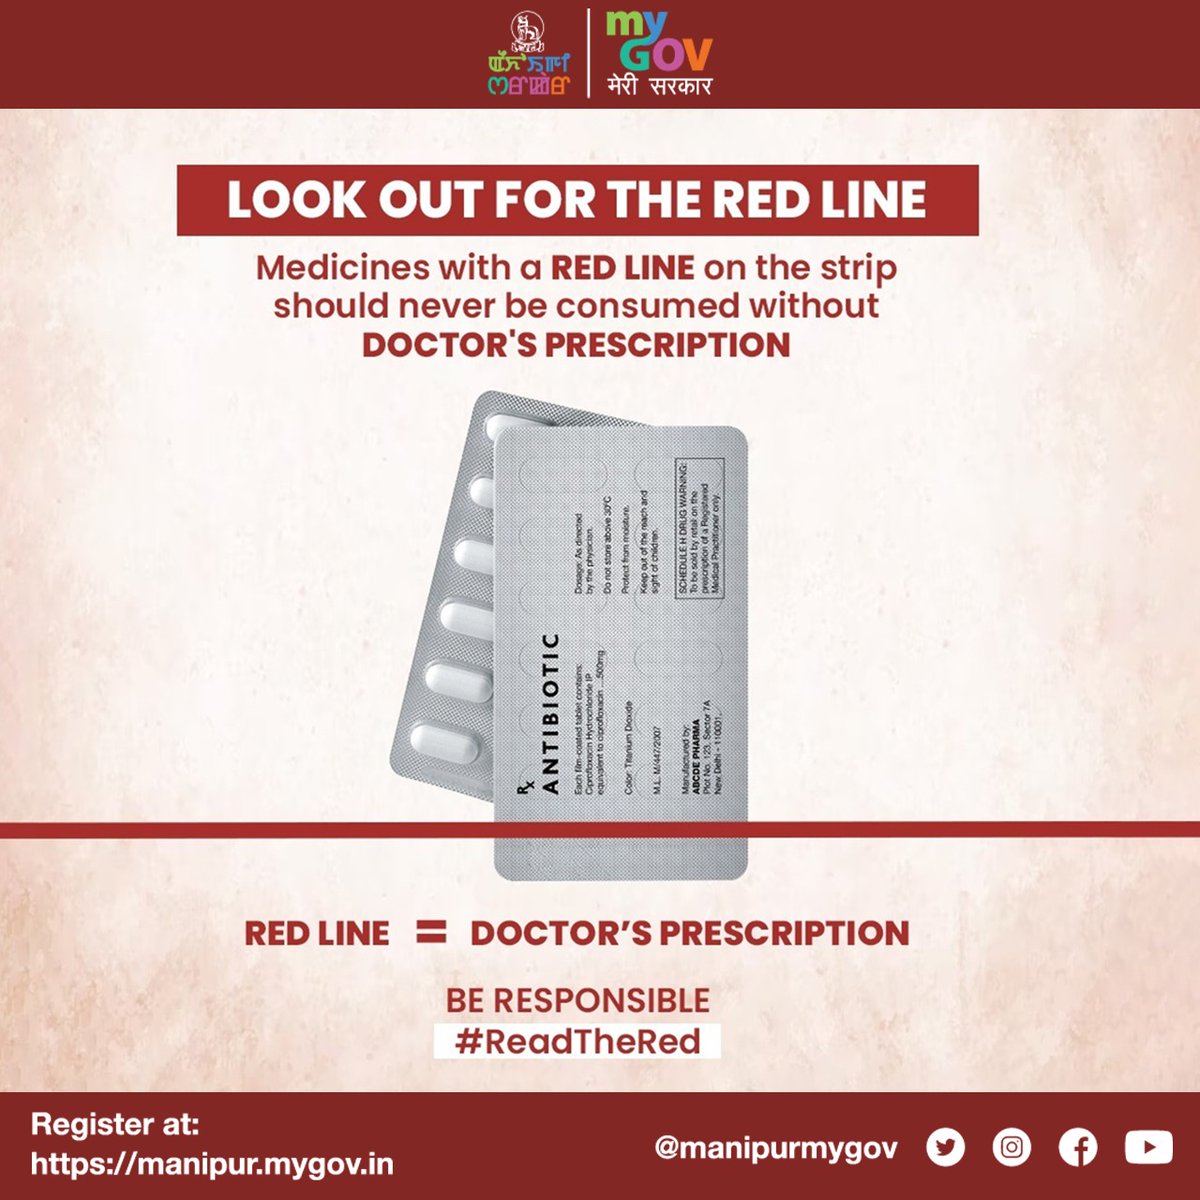 Spot the RED LINE on medicine strips? 
It's not just a mark, it's your cue to consult a doctor before popping pills!
Stay responsible with your health.  

#MedicationSafety #ConsultADoctor #HealthResponsibility #RedLineReminder #HealthAwareness #HeteroHealthcare